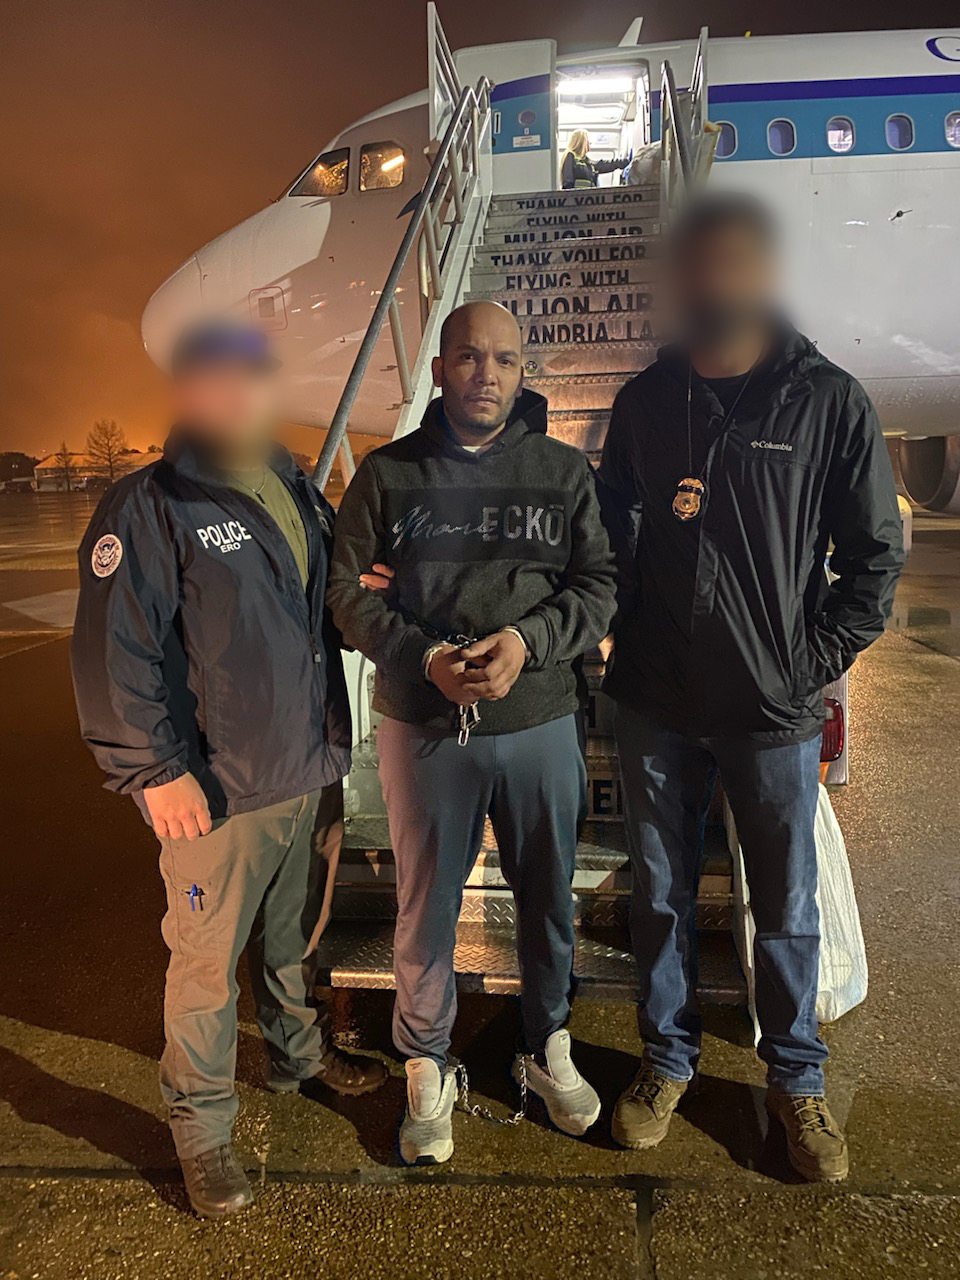 ERO Boston removes fugitive wanted for commercial theft conviction in Brazil